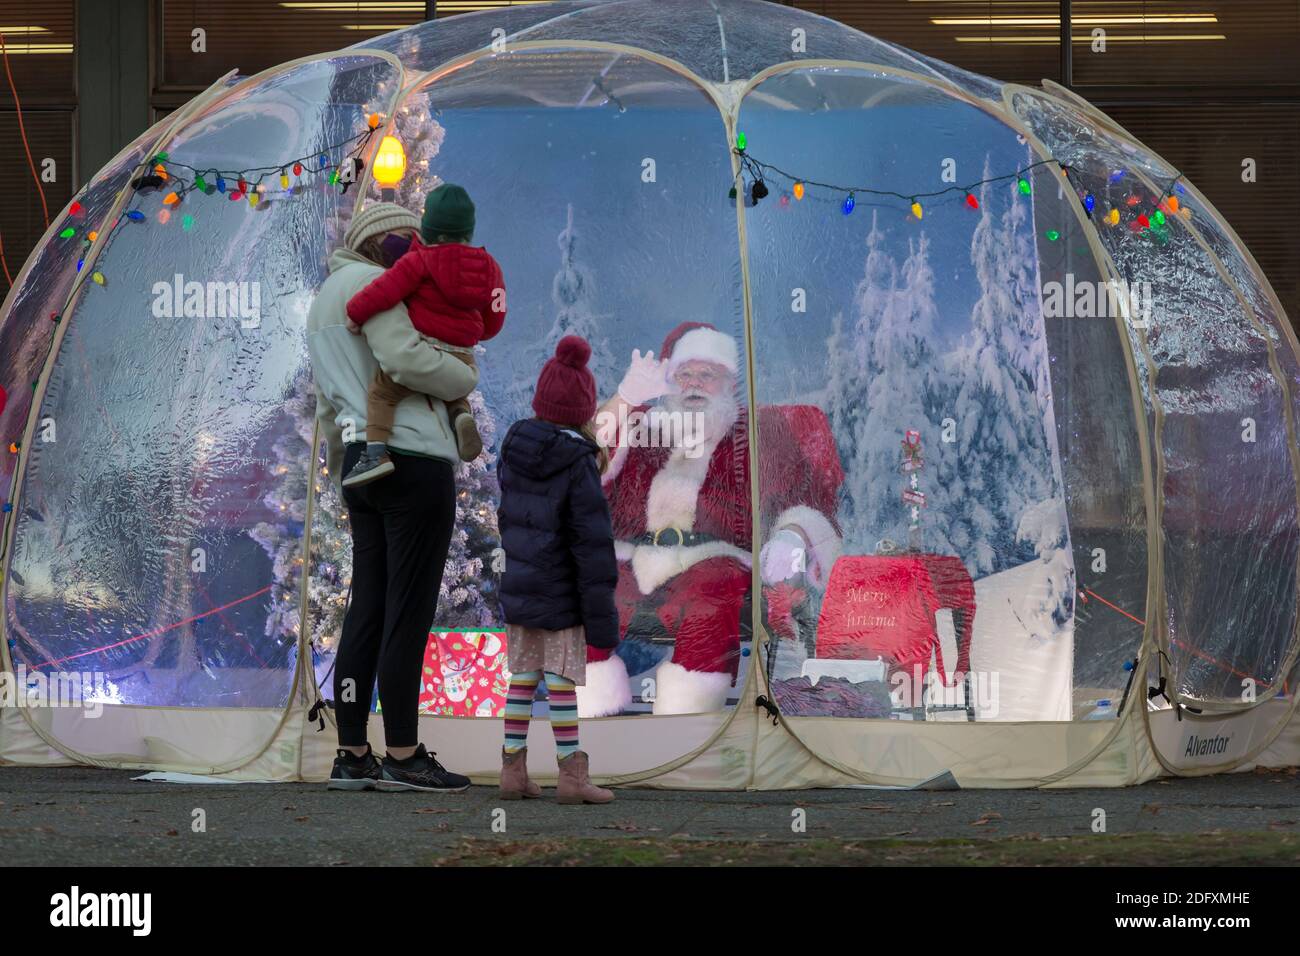 Seattle, Washington, USA. 6th December, 2020. Dan Kemmis, known as the Seattle Santa, greets a young family from within a protective plastic bubble in Seattle’s Greenwood neighborhood. Unable to schedule private events due to the coronavirus pandemic, Kemmis is making physically distanced public appearances with some donations benefiting local homeless shelters. Credit: Paul Christian Gordon/Alamy Live News Stock Photo